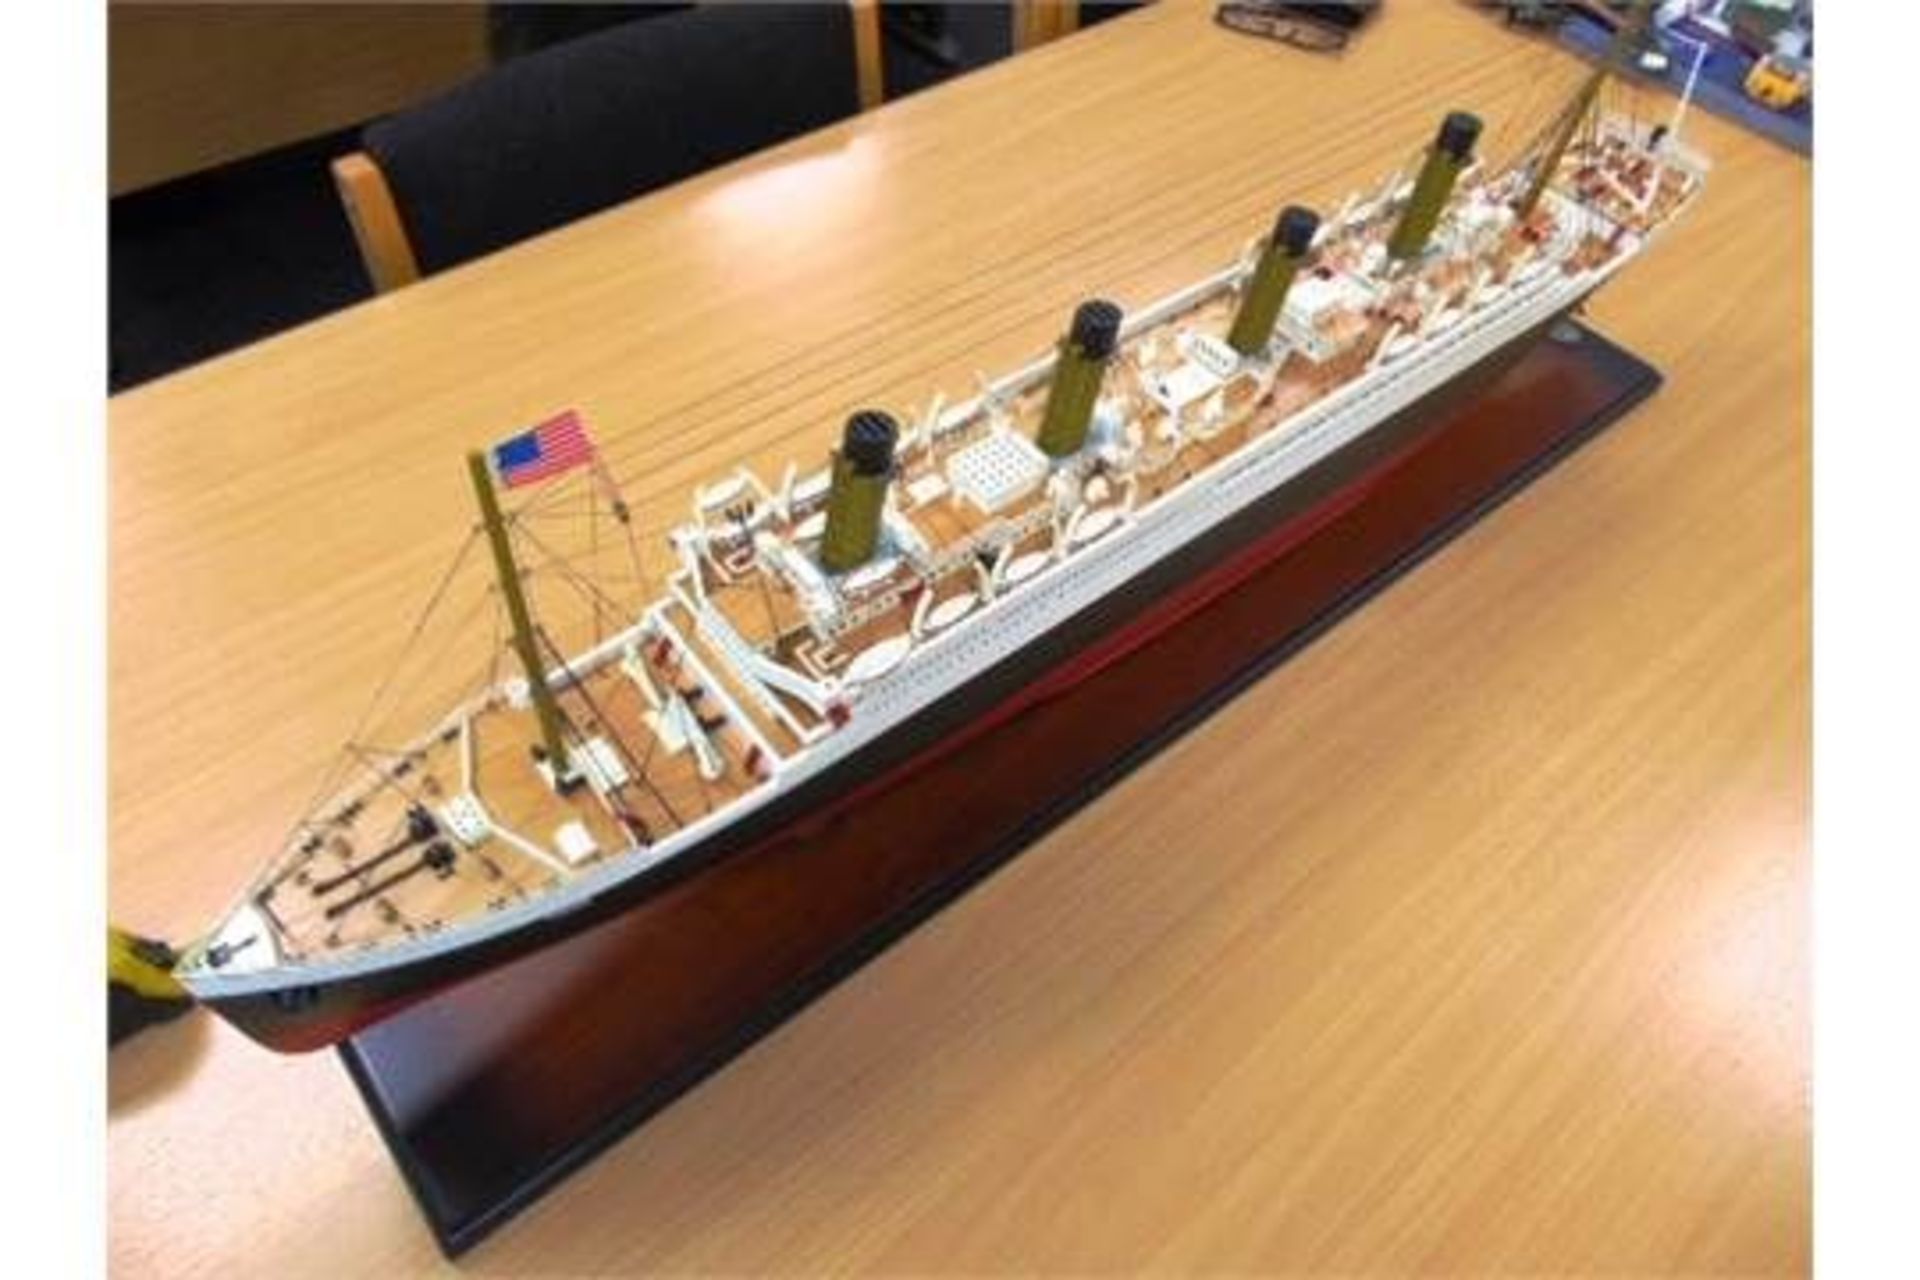 RMS TITANIC HIGHLY DETAILED WOOD SCALE MODEL - Image 2 of 11